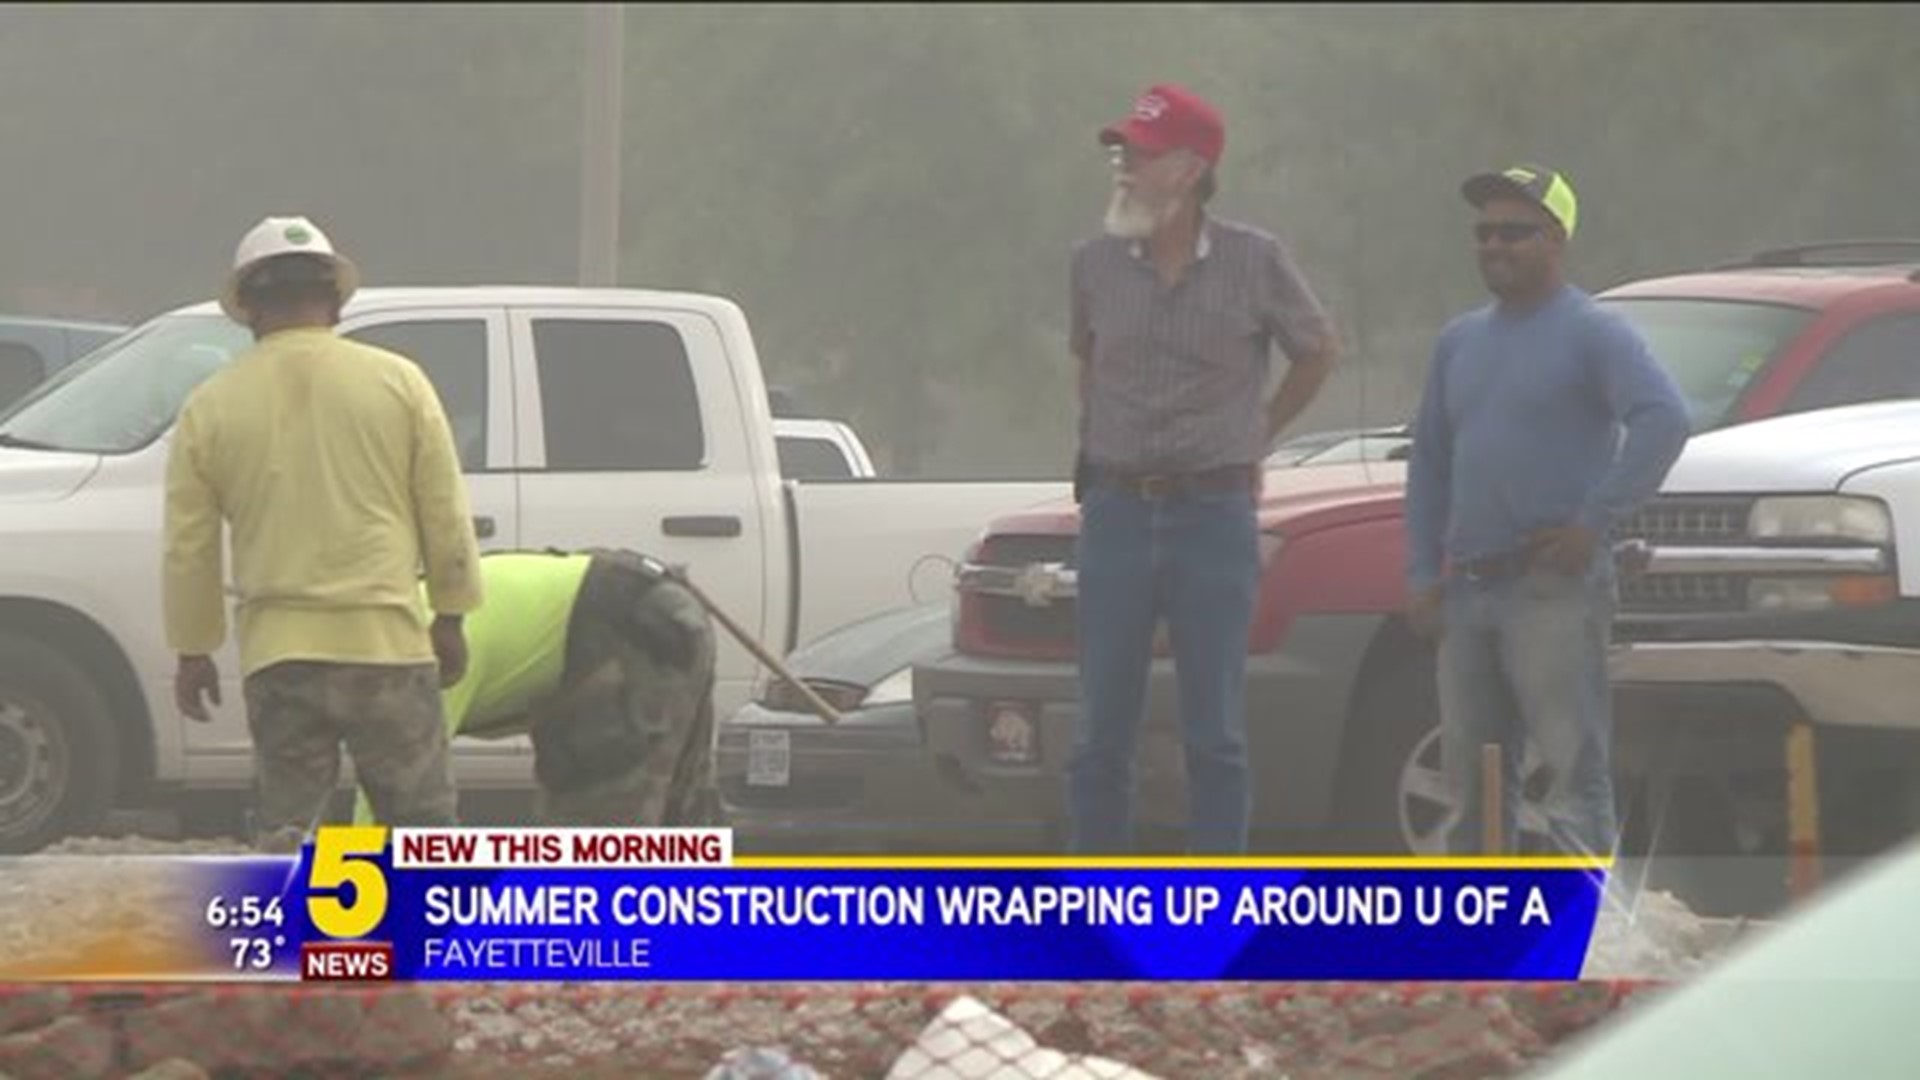 U OF A CONSTRUCTION WRAPPING UP